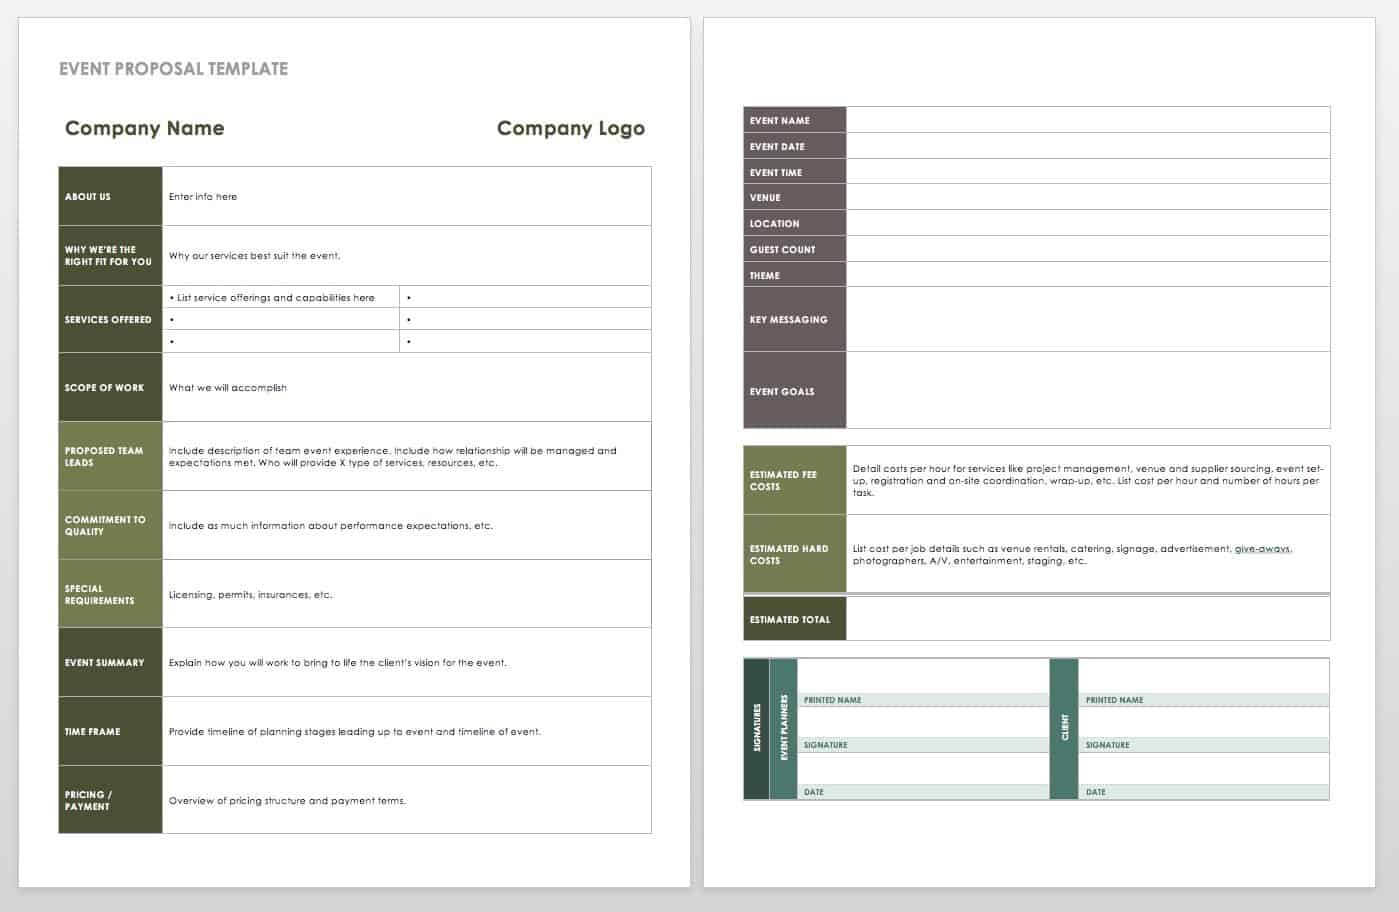 21 Free Event Planning Templates | Smartsheet Inside Post Event Evaluation Report Template